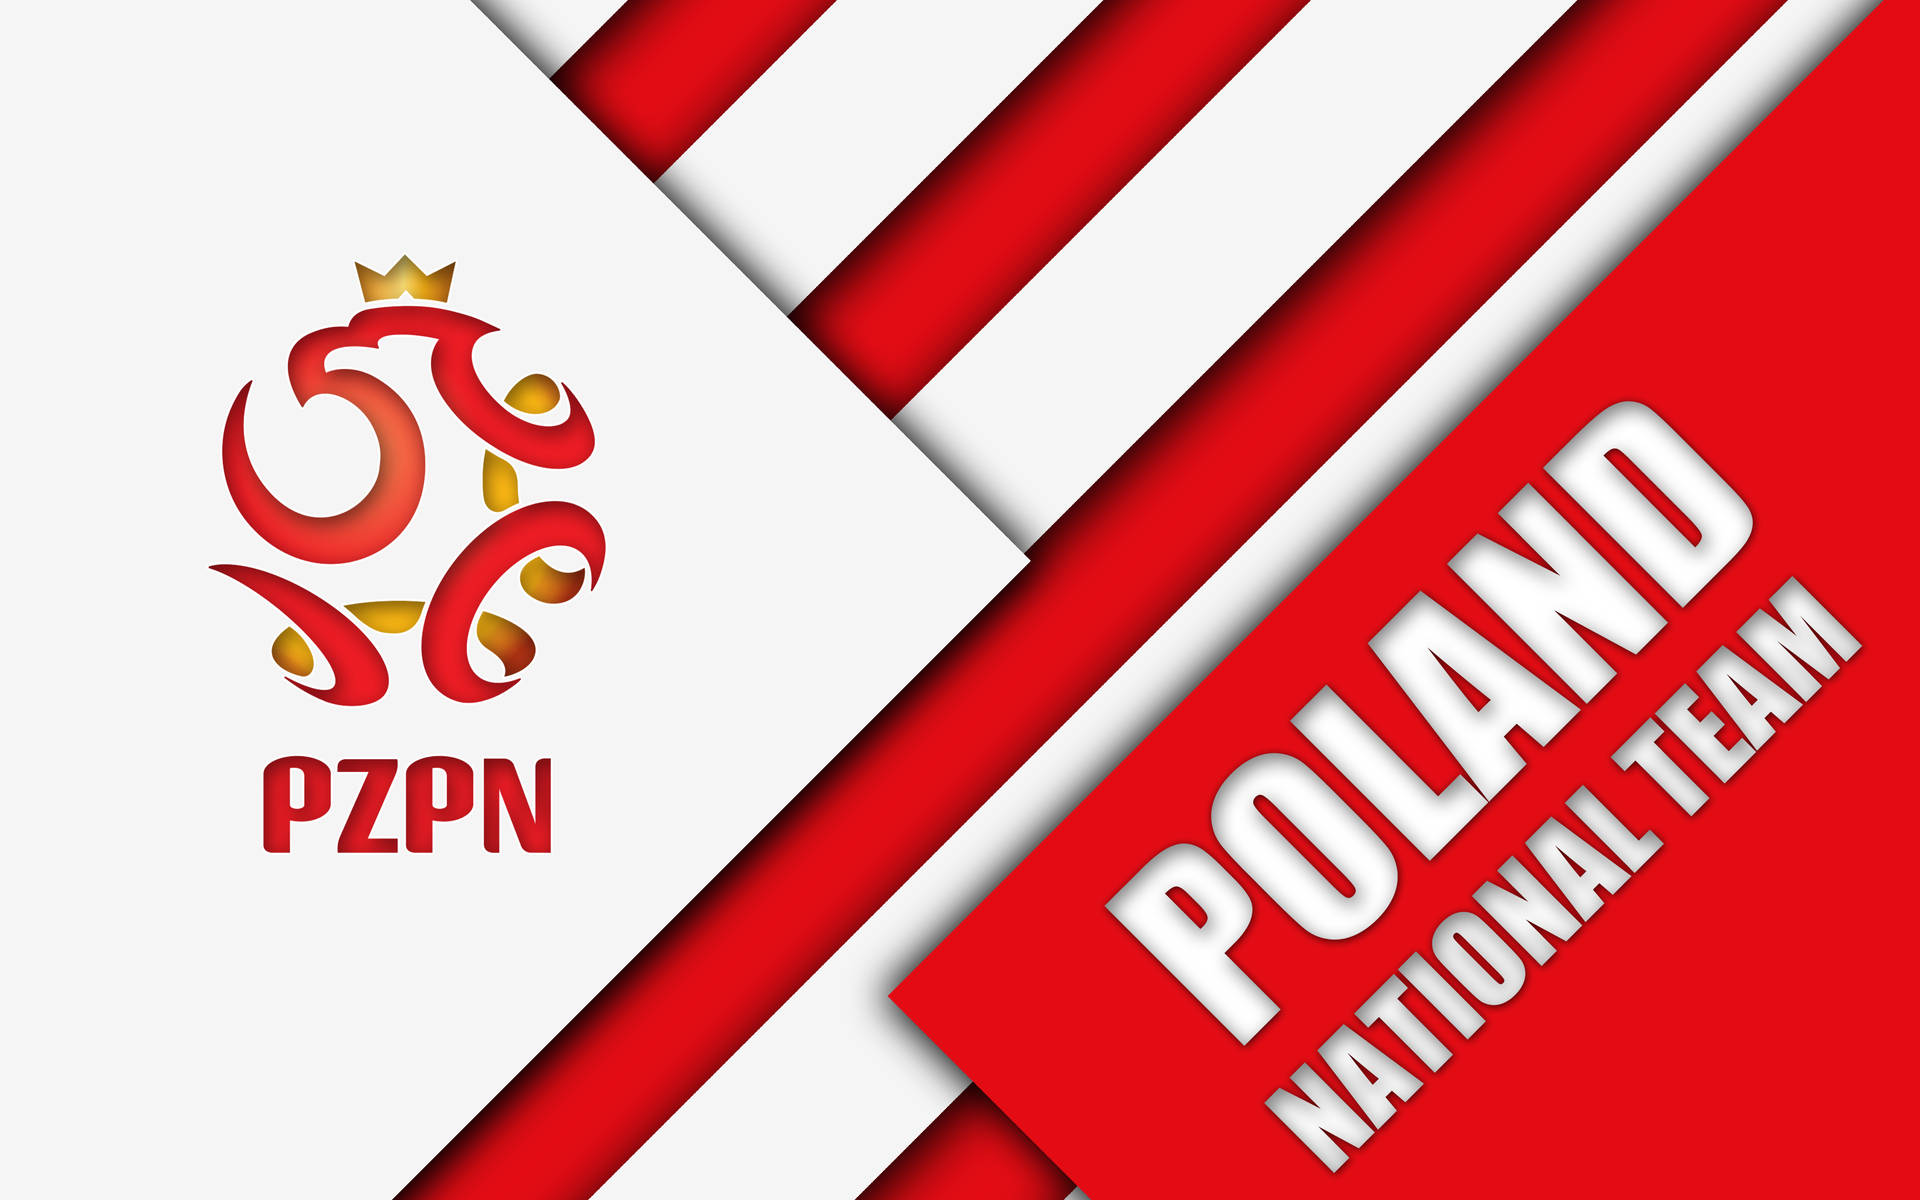 Top 999+ Poland National Football Team Wallpaper Full HD, 4K✅Free to Use